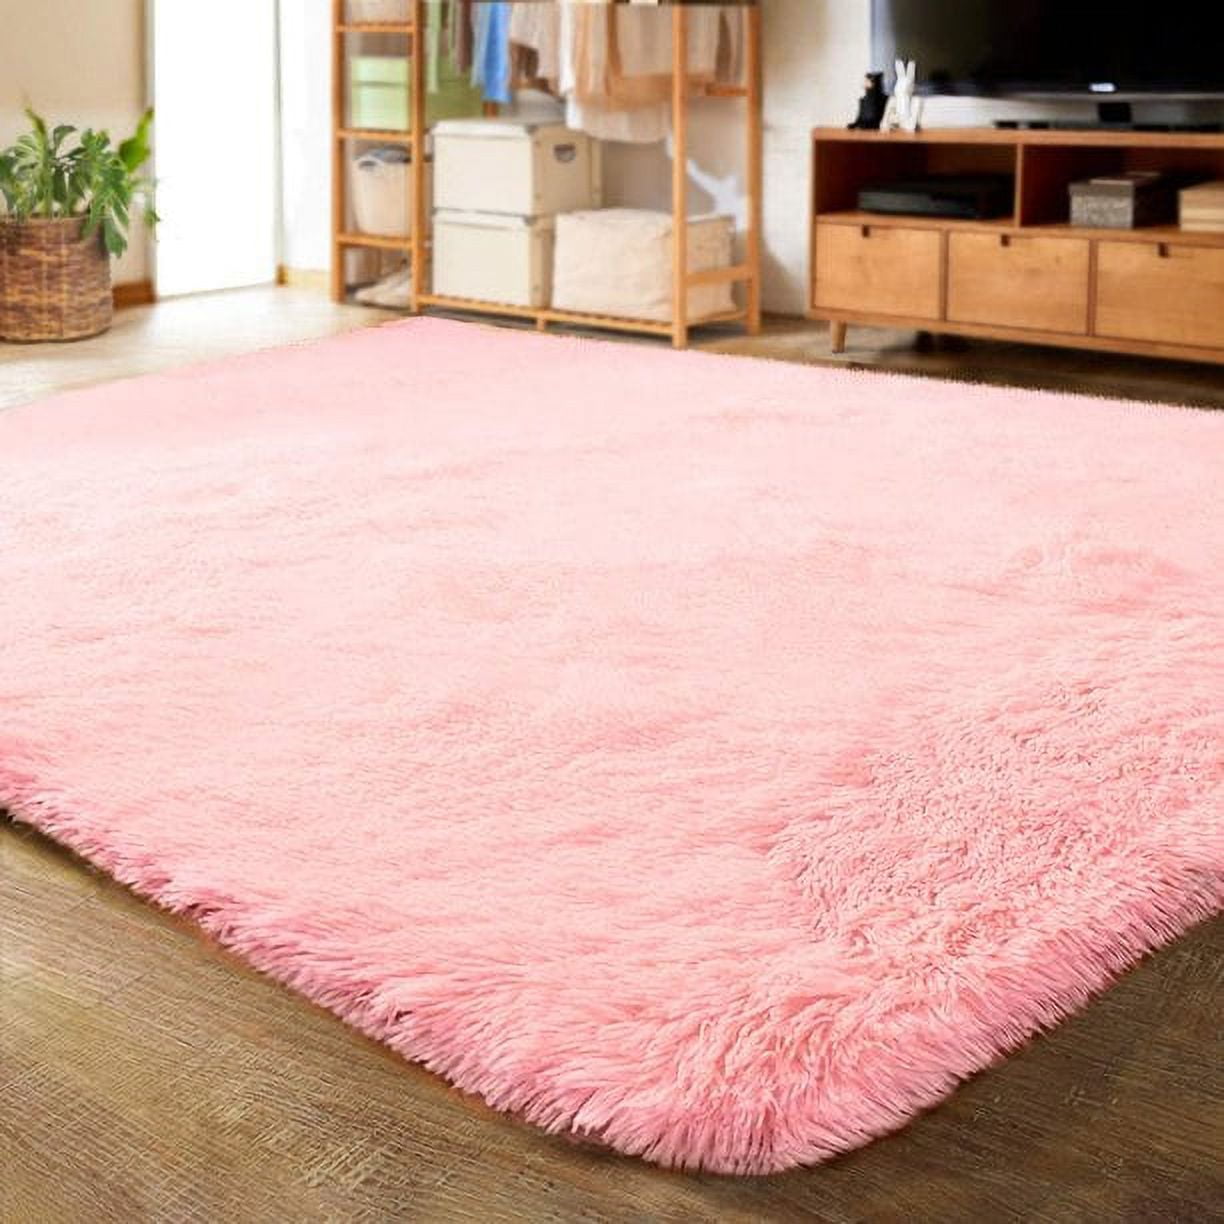 Likoyo Kids Rug Pink Rug for Bedroom Girls Nursery Rug 3'x5' Washable Area Rug Bath Mat Non Slip Cute Cat Rug Baby Carpet Play Mat Soft Rugs for Living